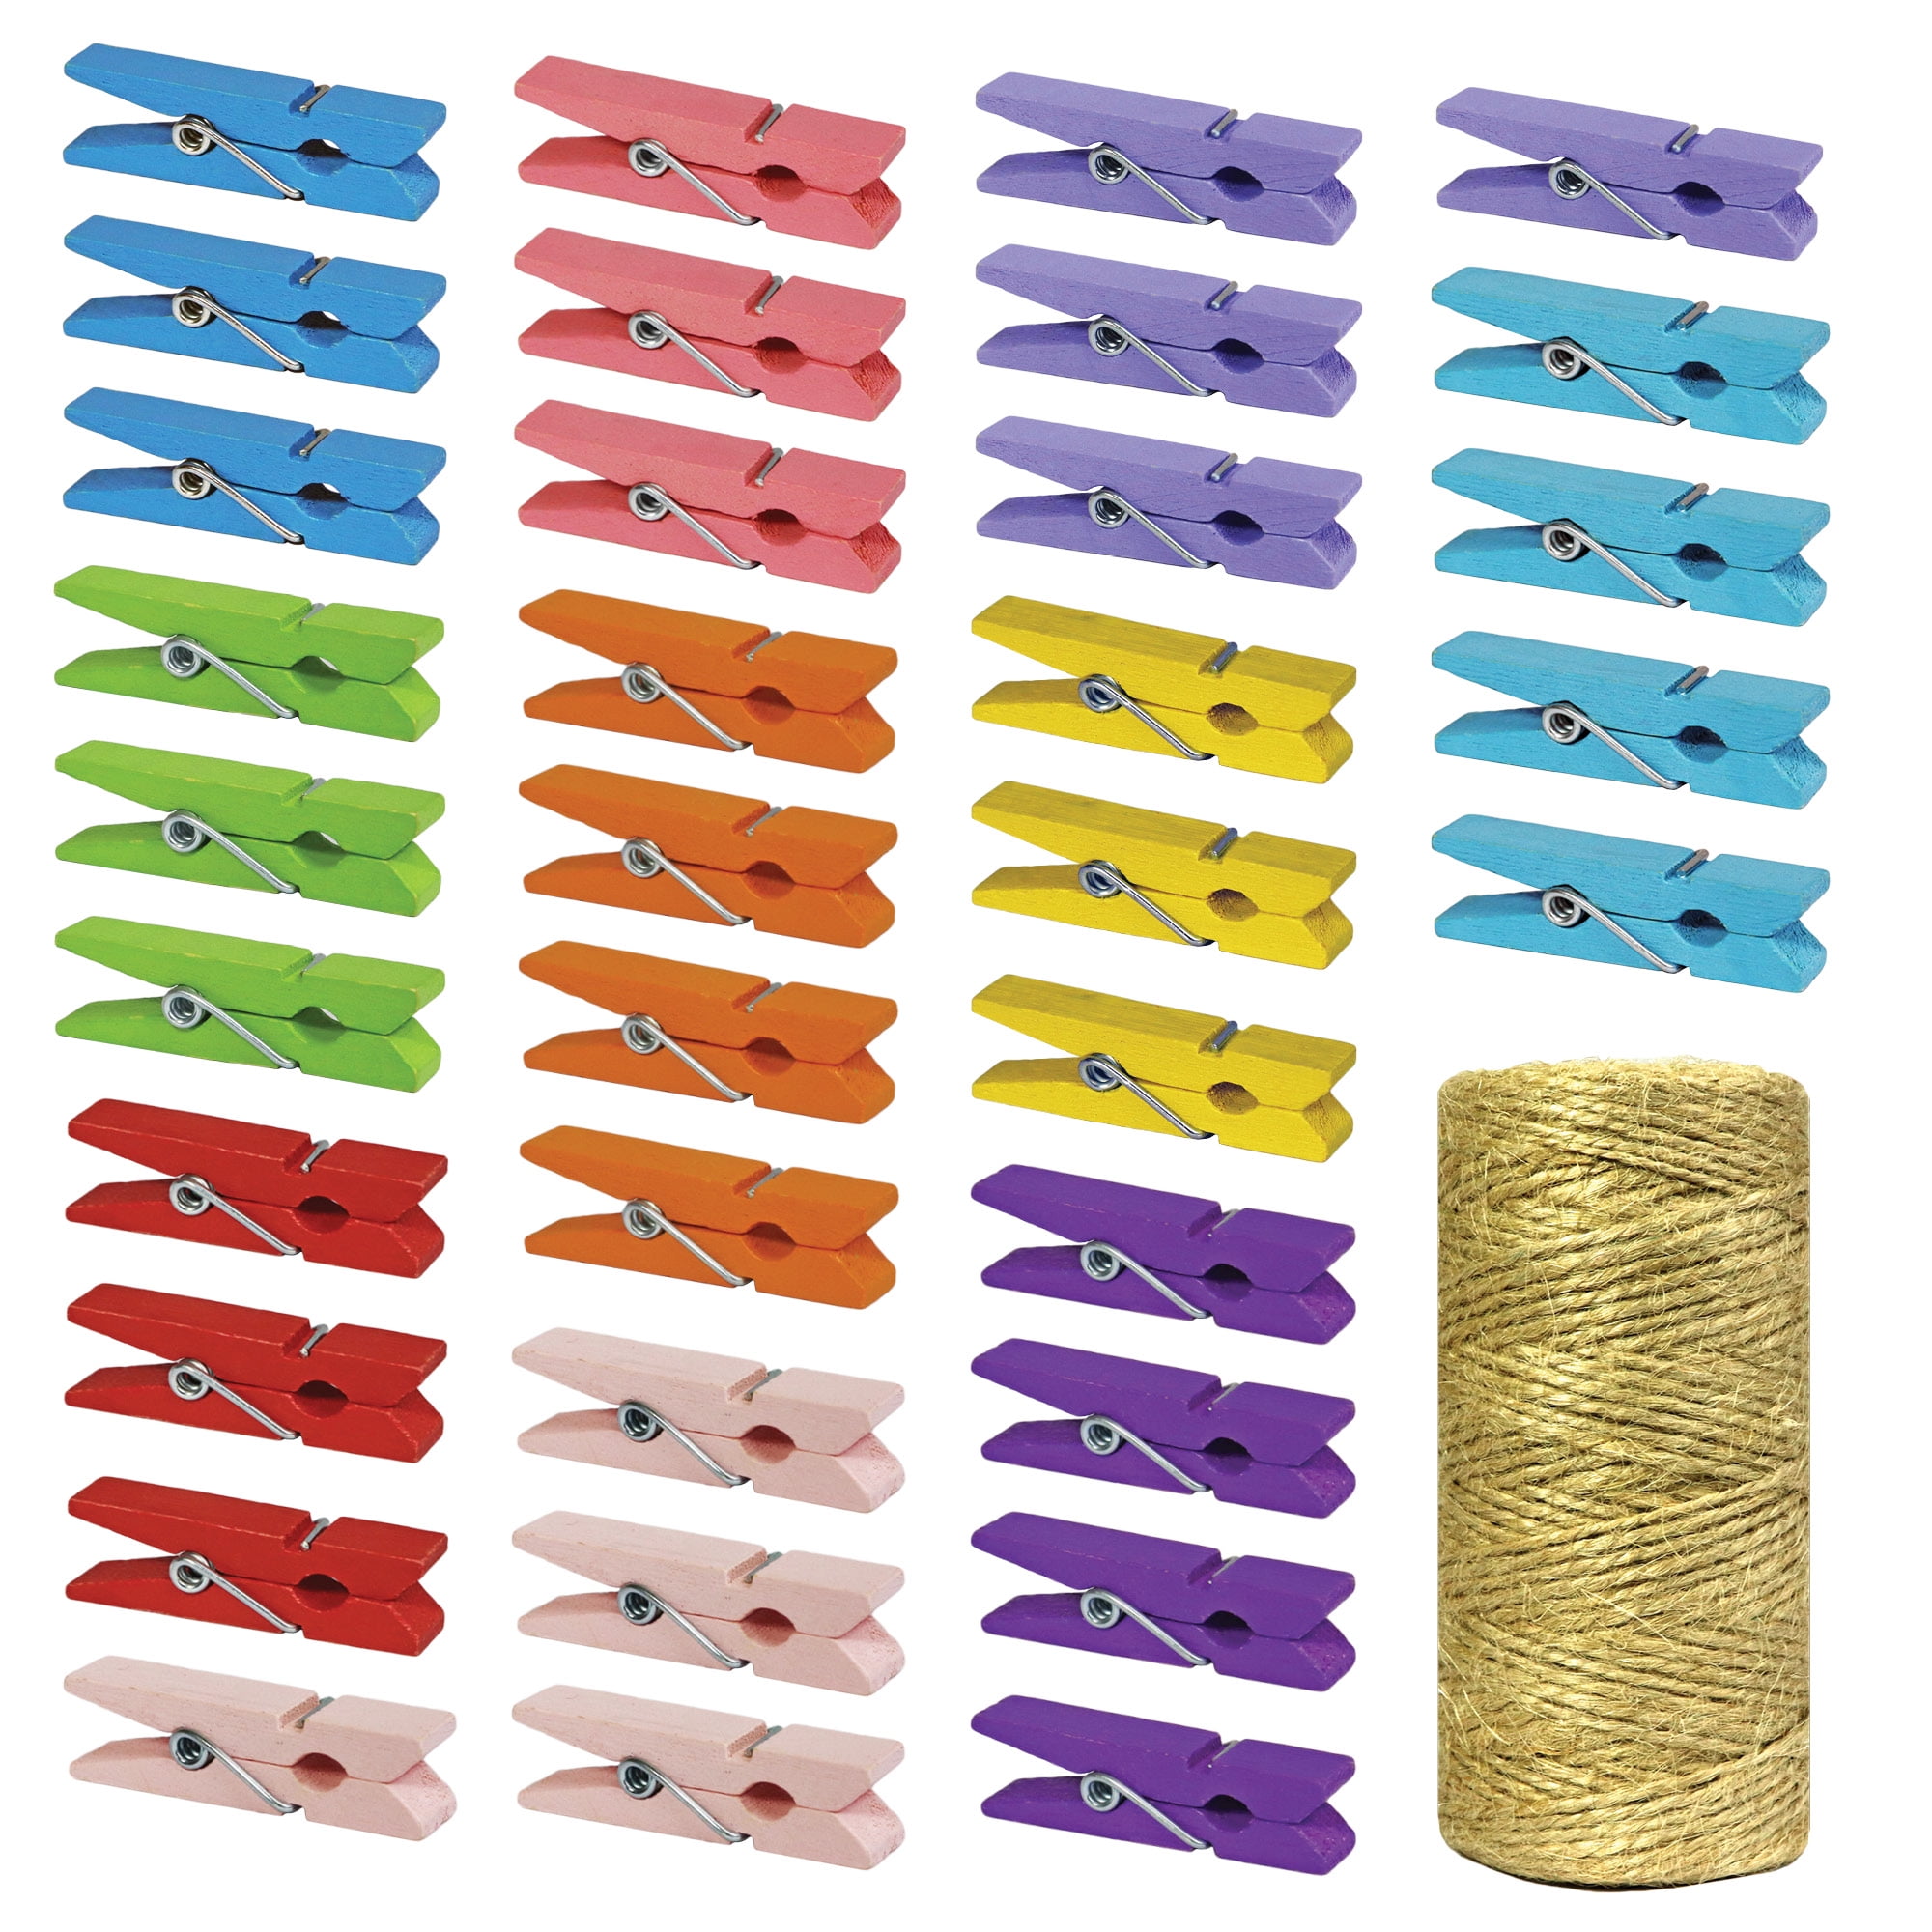 OUNONA 100pcs Natural Wooden Mini Clothespin For Clothes Photo Paper Craft Toys